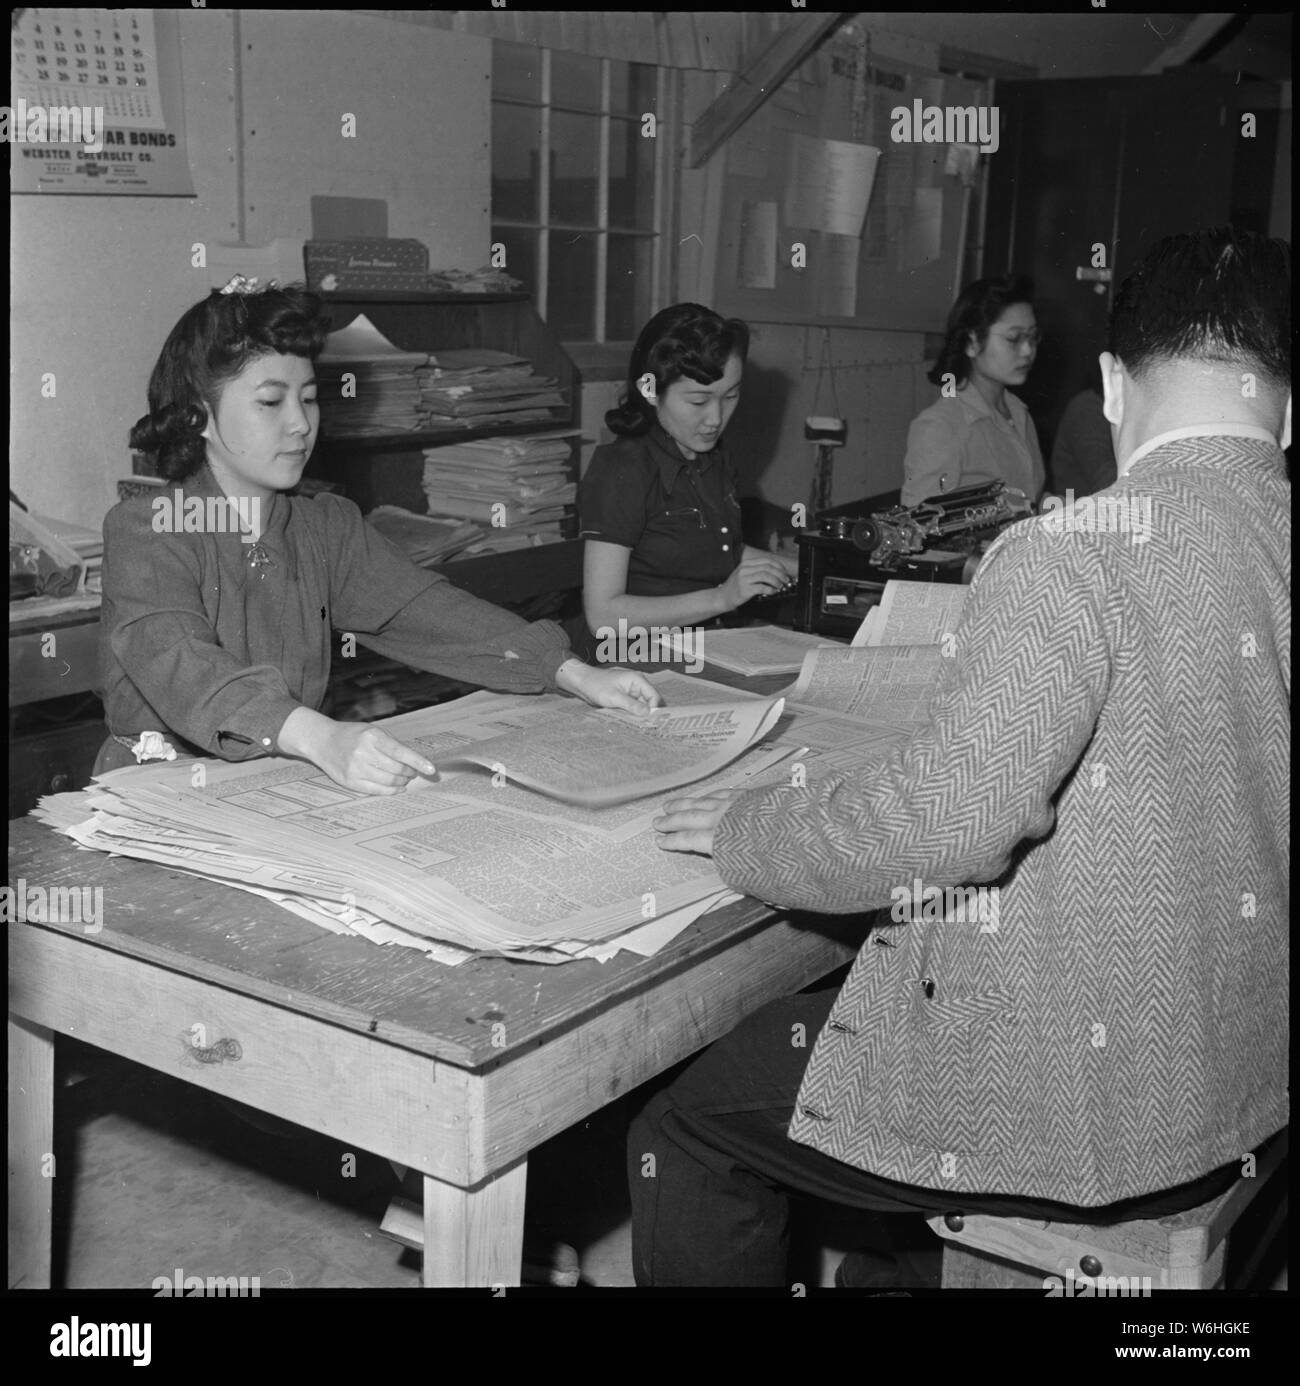 Heart Mountain Relocation Center, Heart Mountain, Wyoming. The repertorial staff of the Sentinel, H . . .; Scope and content:  The full caption for this photograph reads: Heart Mountain Relocation Center, Heart Mountain, Wyoming. The repertorial staff of the Sentinel, Heart Mountain Relocation Center newspaper do double duty on Friday night and Saturday morning in folding and preparing their paper for distribution. The paper, edited and published without War Relocation Authority censorship, represents the news and expresses the views of residents of Japanese ancestry relocated from west coast Stock Photo